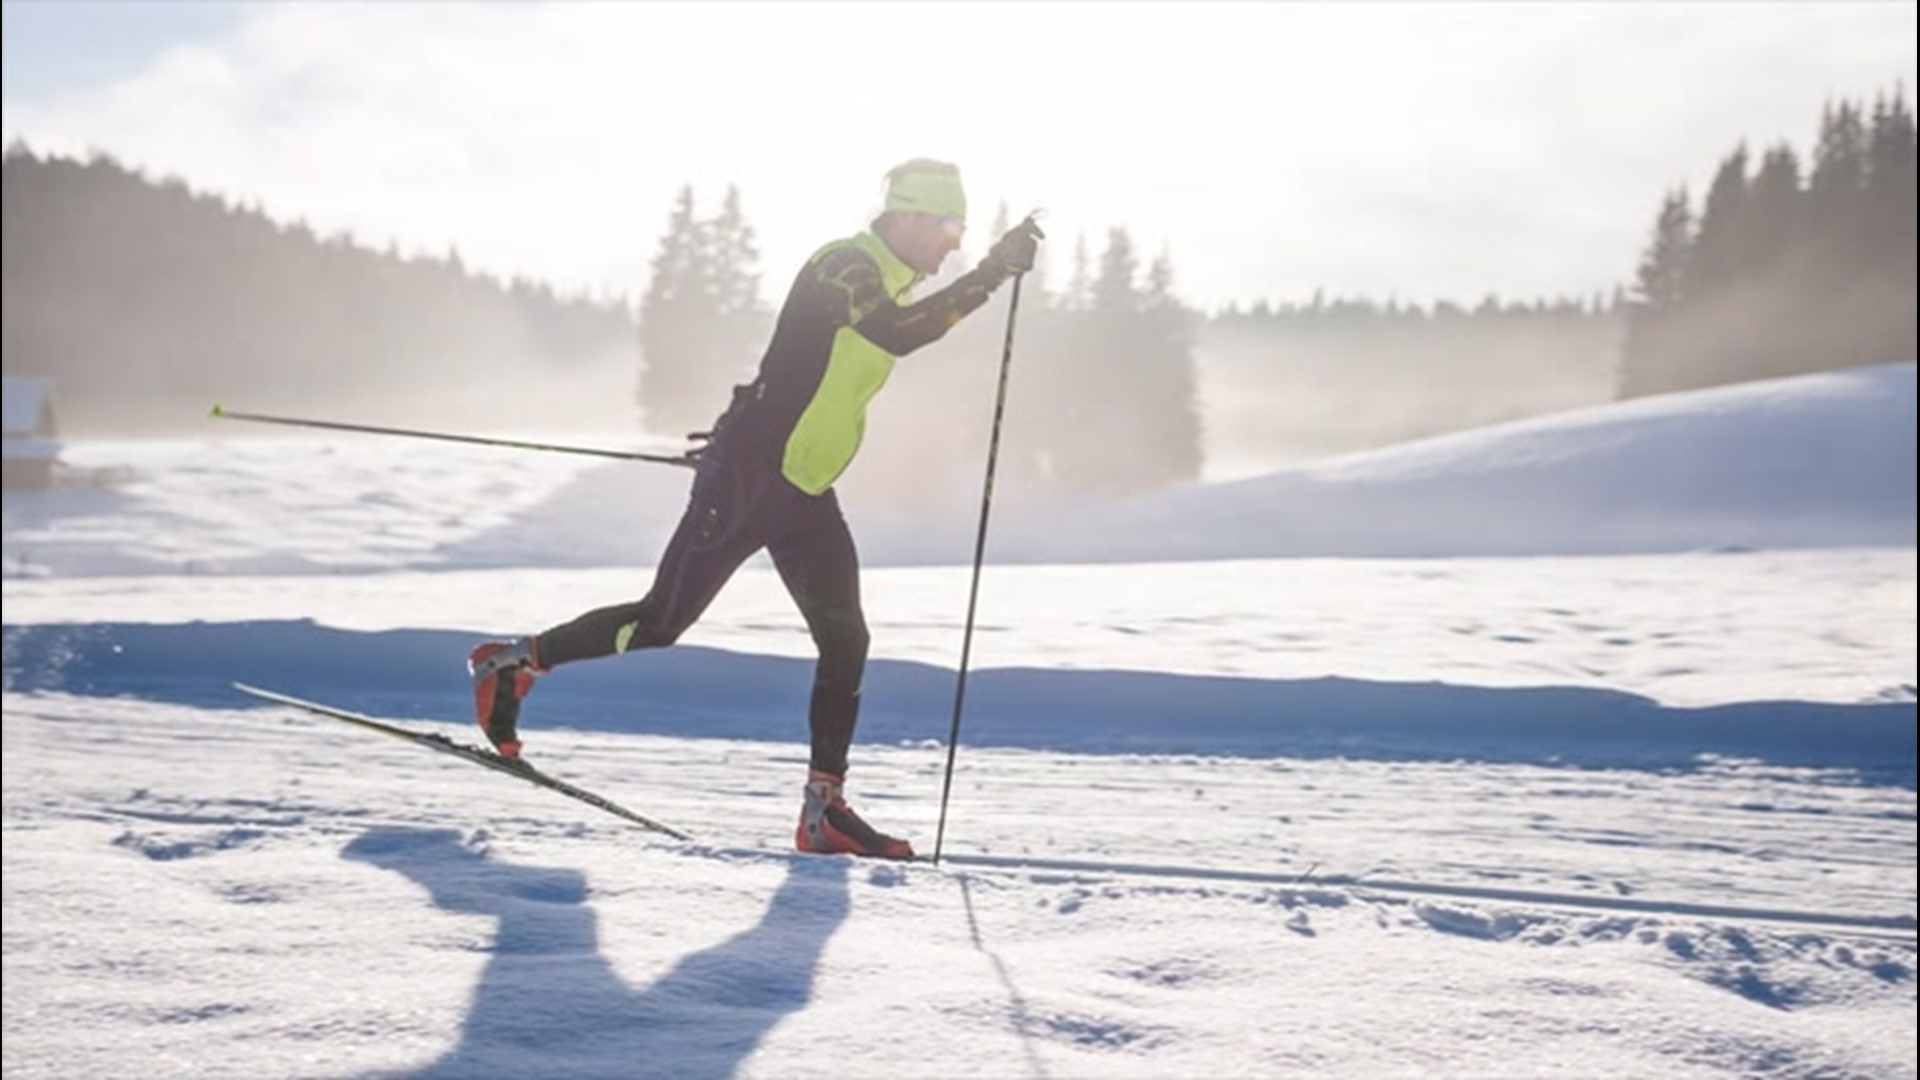 It may be winter, but many people are heading outdoors to ski and hike. Our own Lincoln Riddle takes a look at some of the health benefits of outdoor winter recreation.